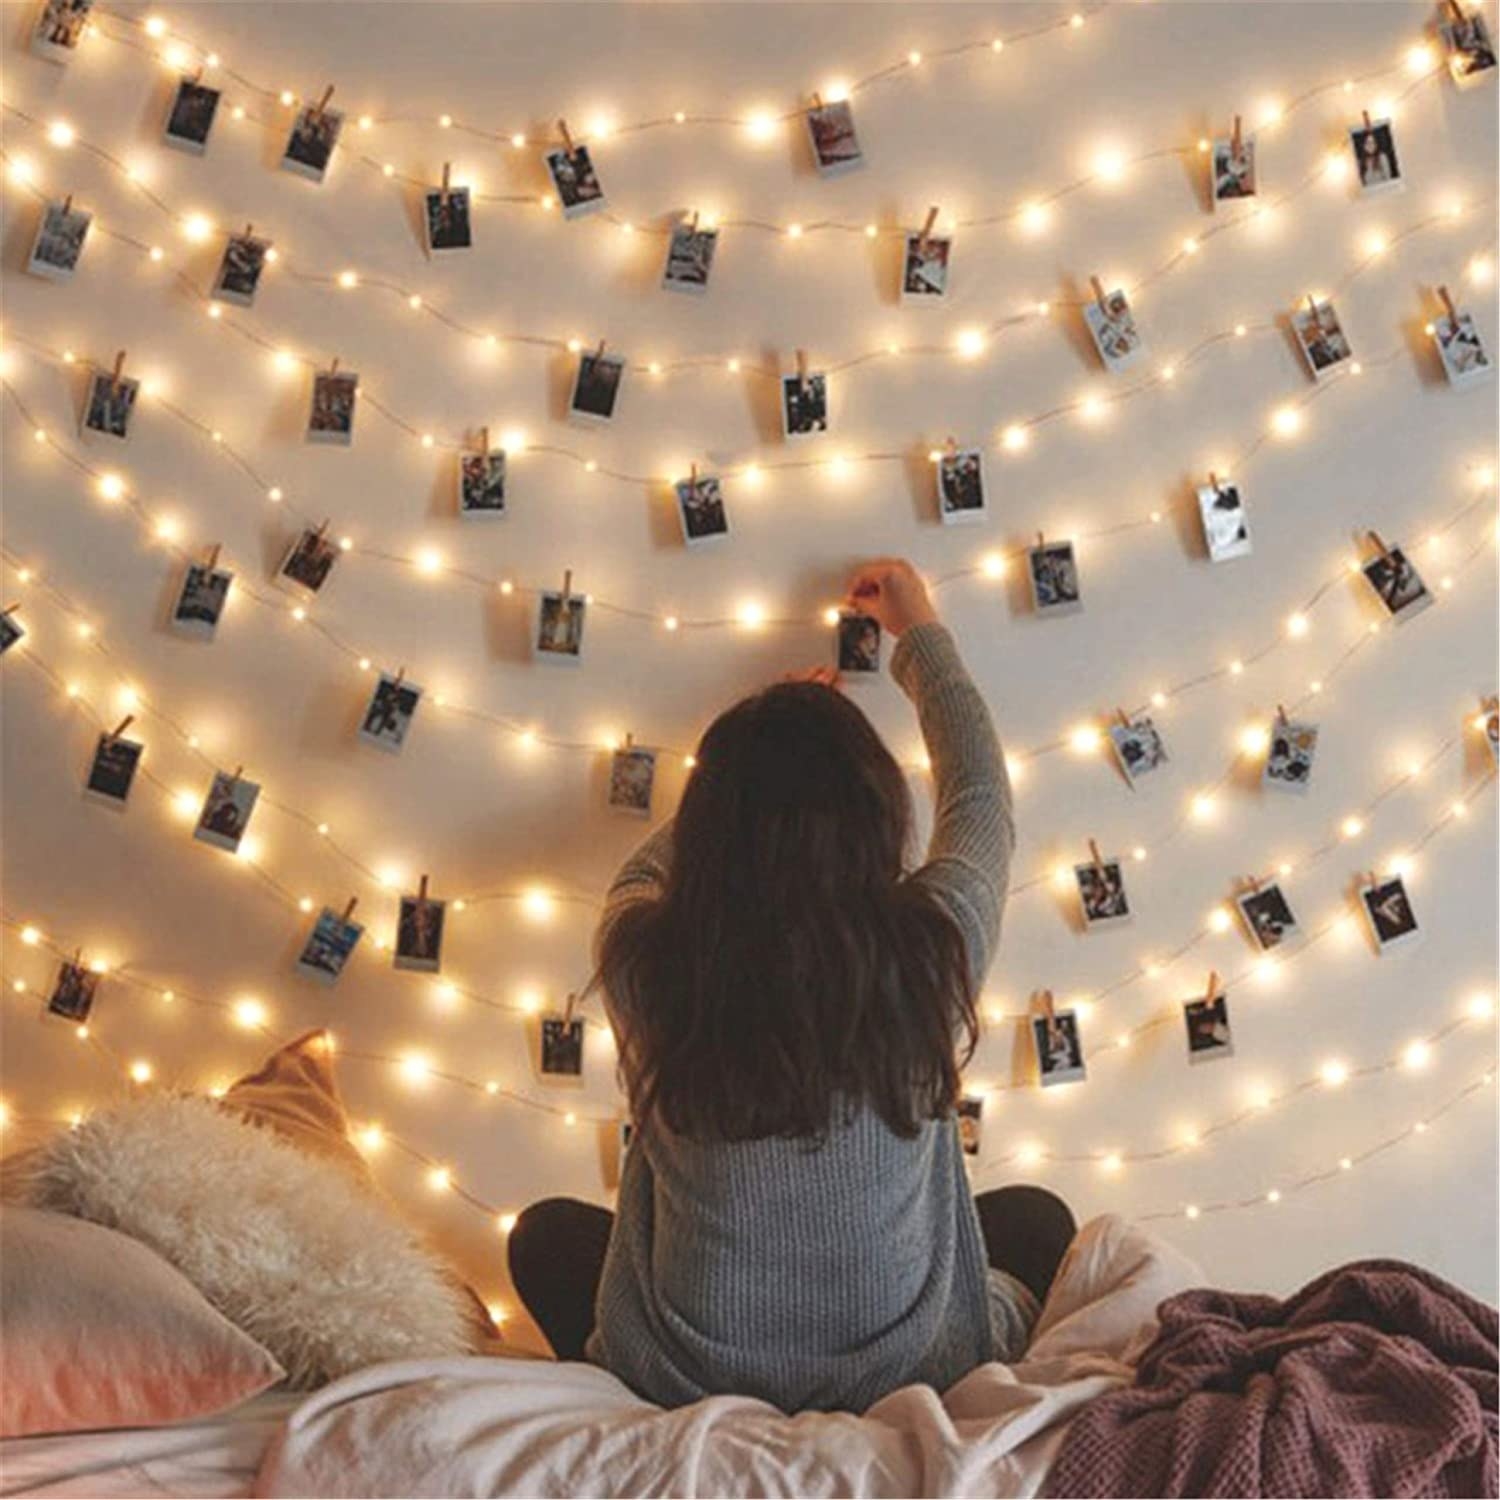 A wall of fairy lights with instant photos clipped onto the fairy lights with small wooden pegs. A woman&#x27;s back can be seen, she is clipping another photo onto the lights.